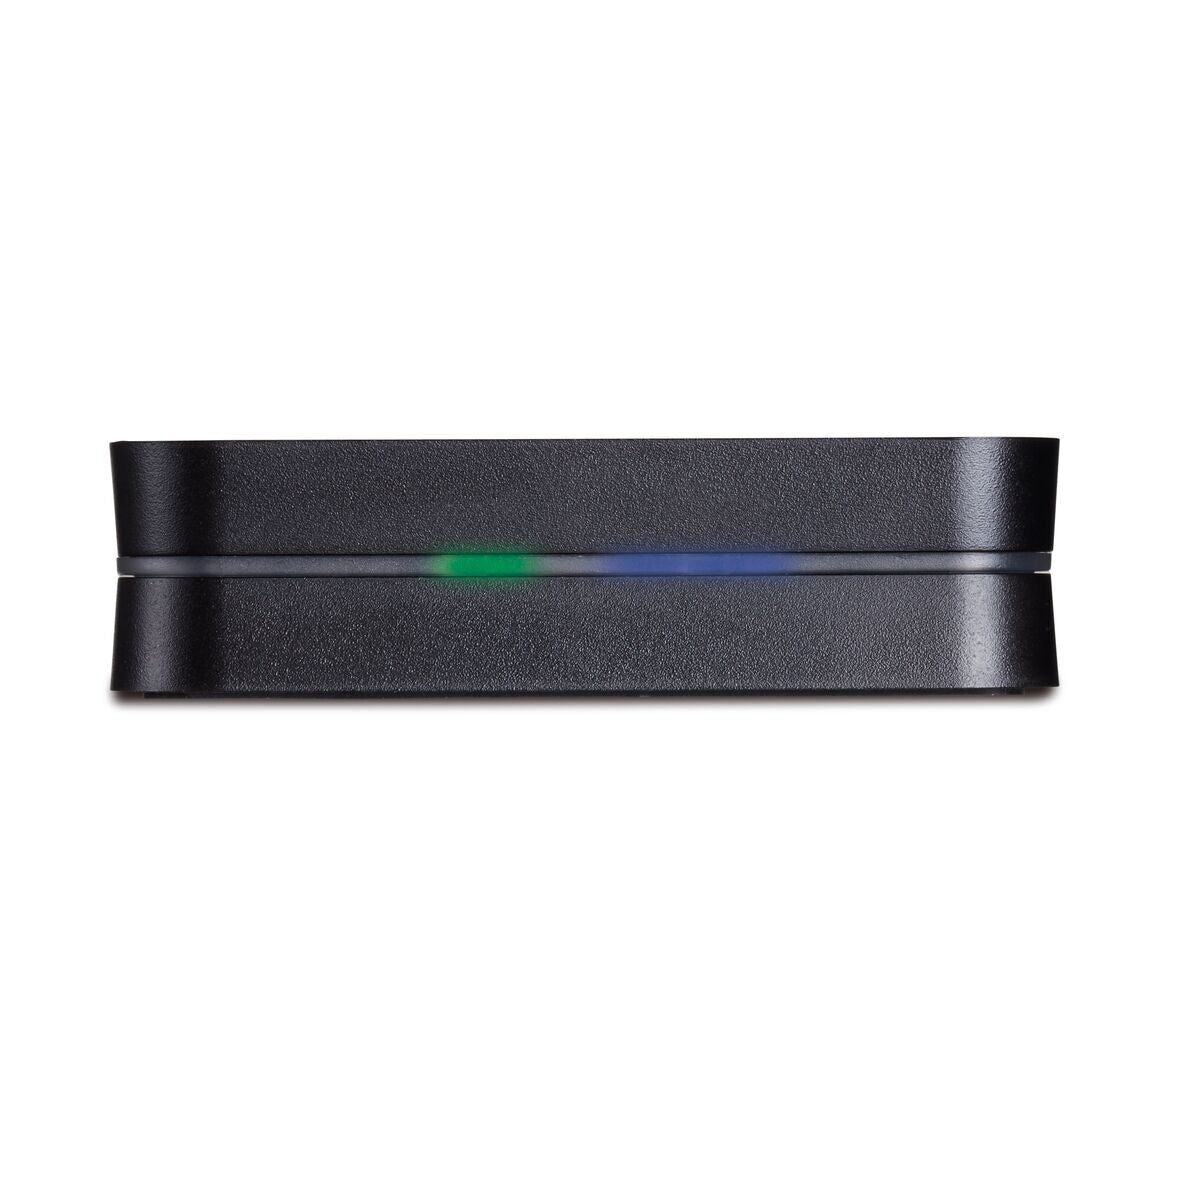 BoomBoom 93 - Bluetooth Receiver with AptX and NFC - Detail Image Green / Blue Indication LED | Marmitek